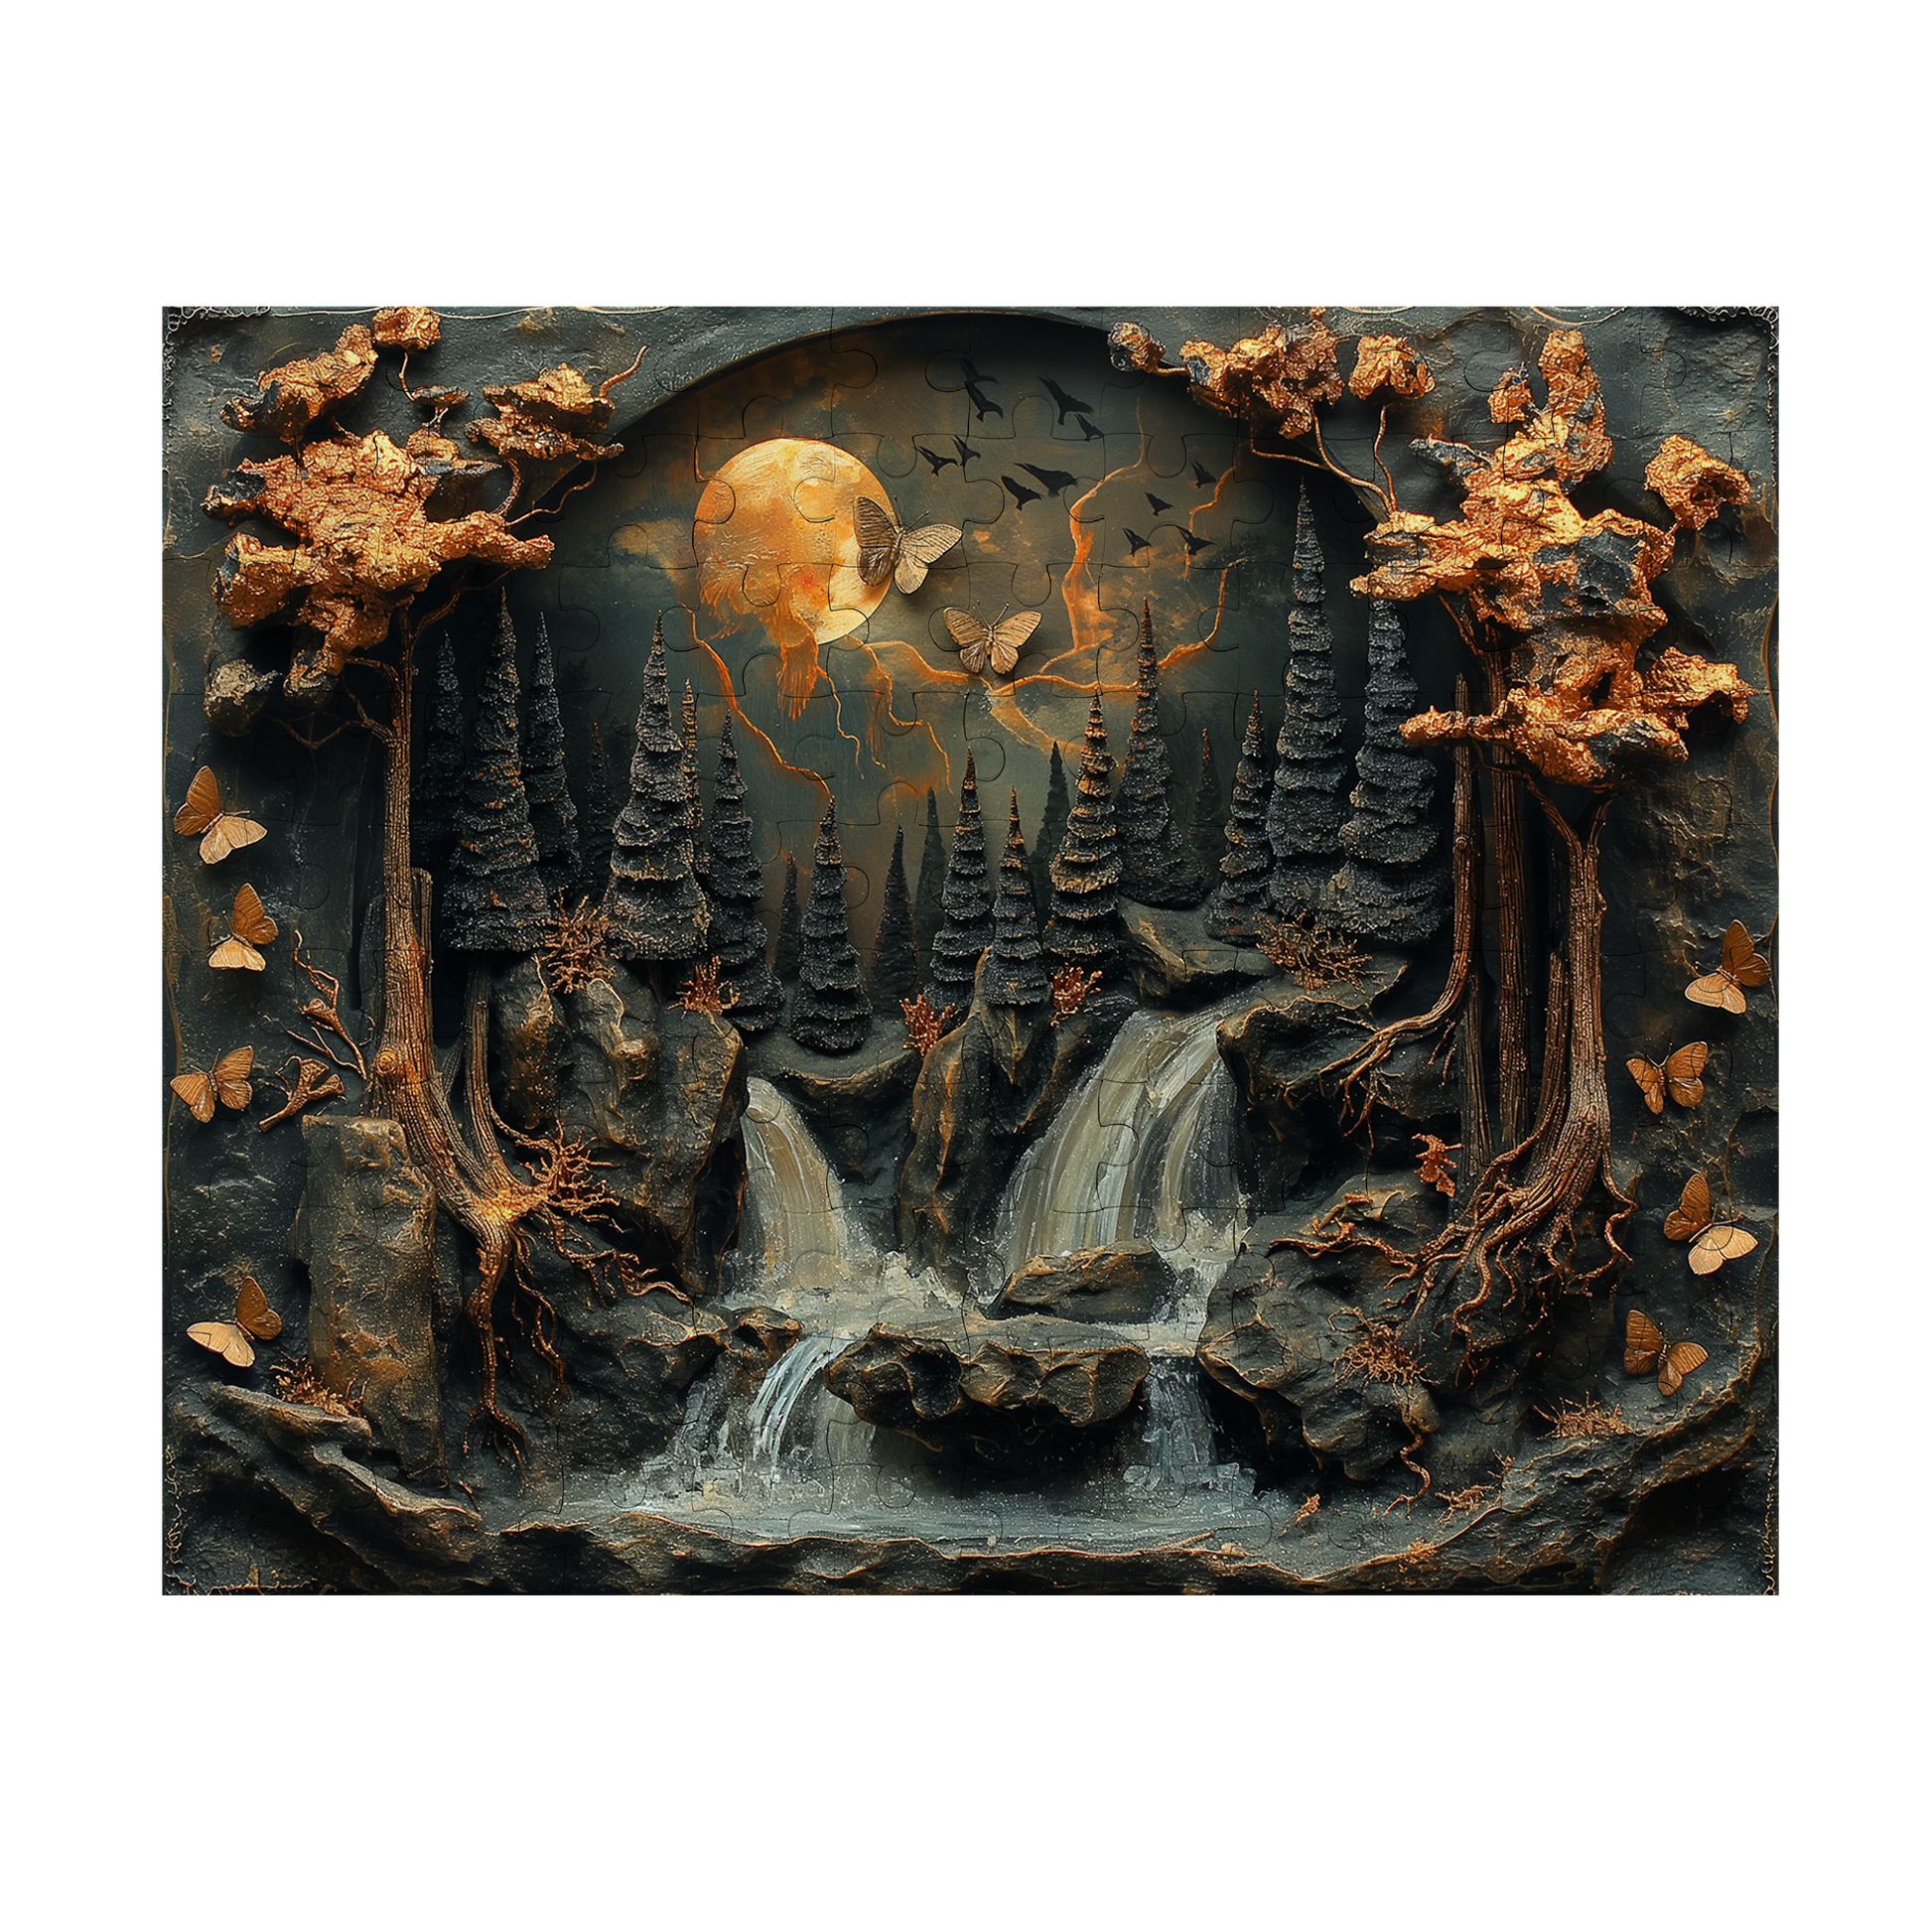 Cascade - Premium Jigsaw Puzzle - Ornate, Fantasy, Carving, Waterfall - Multiple Sizes Available